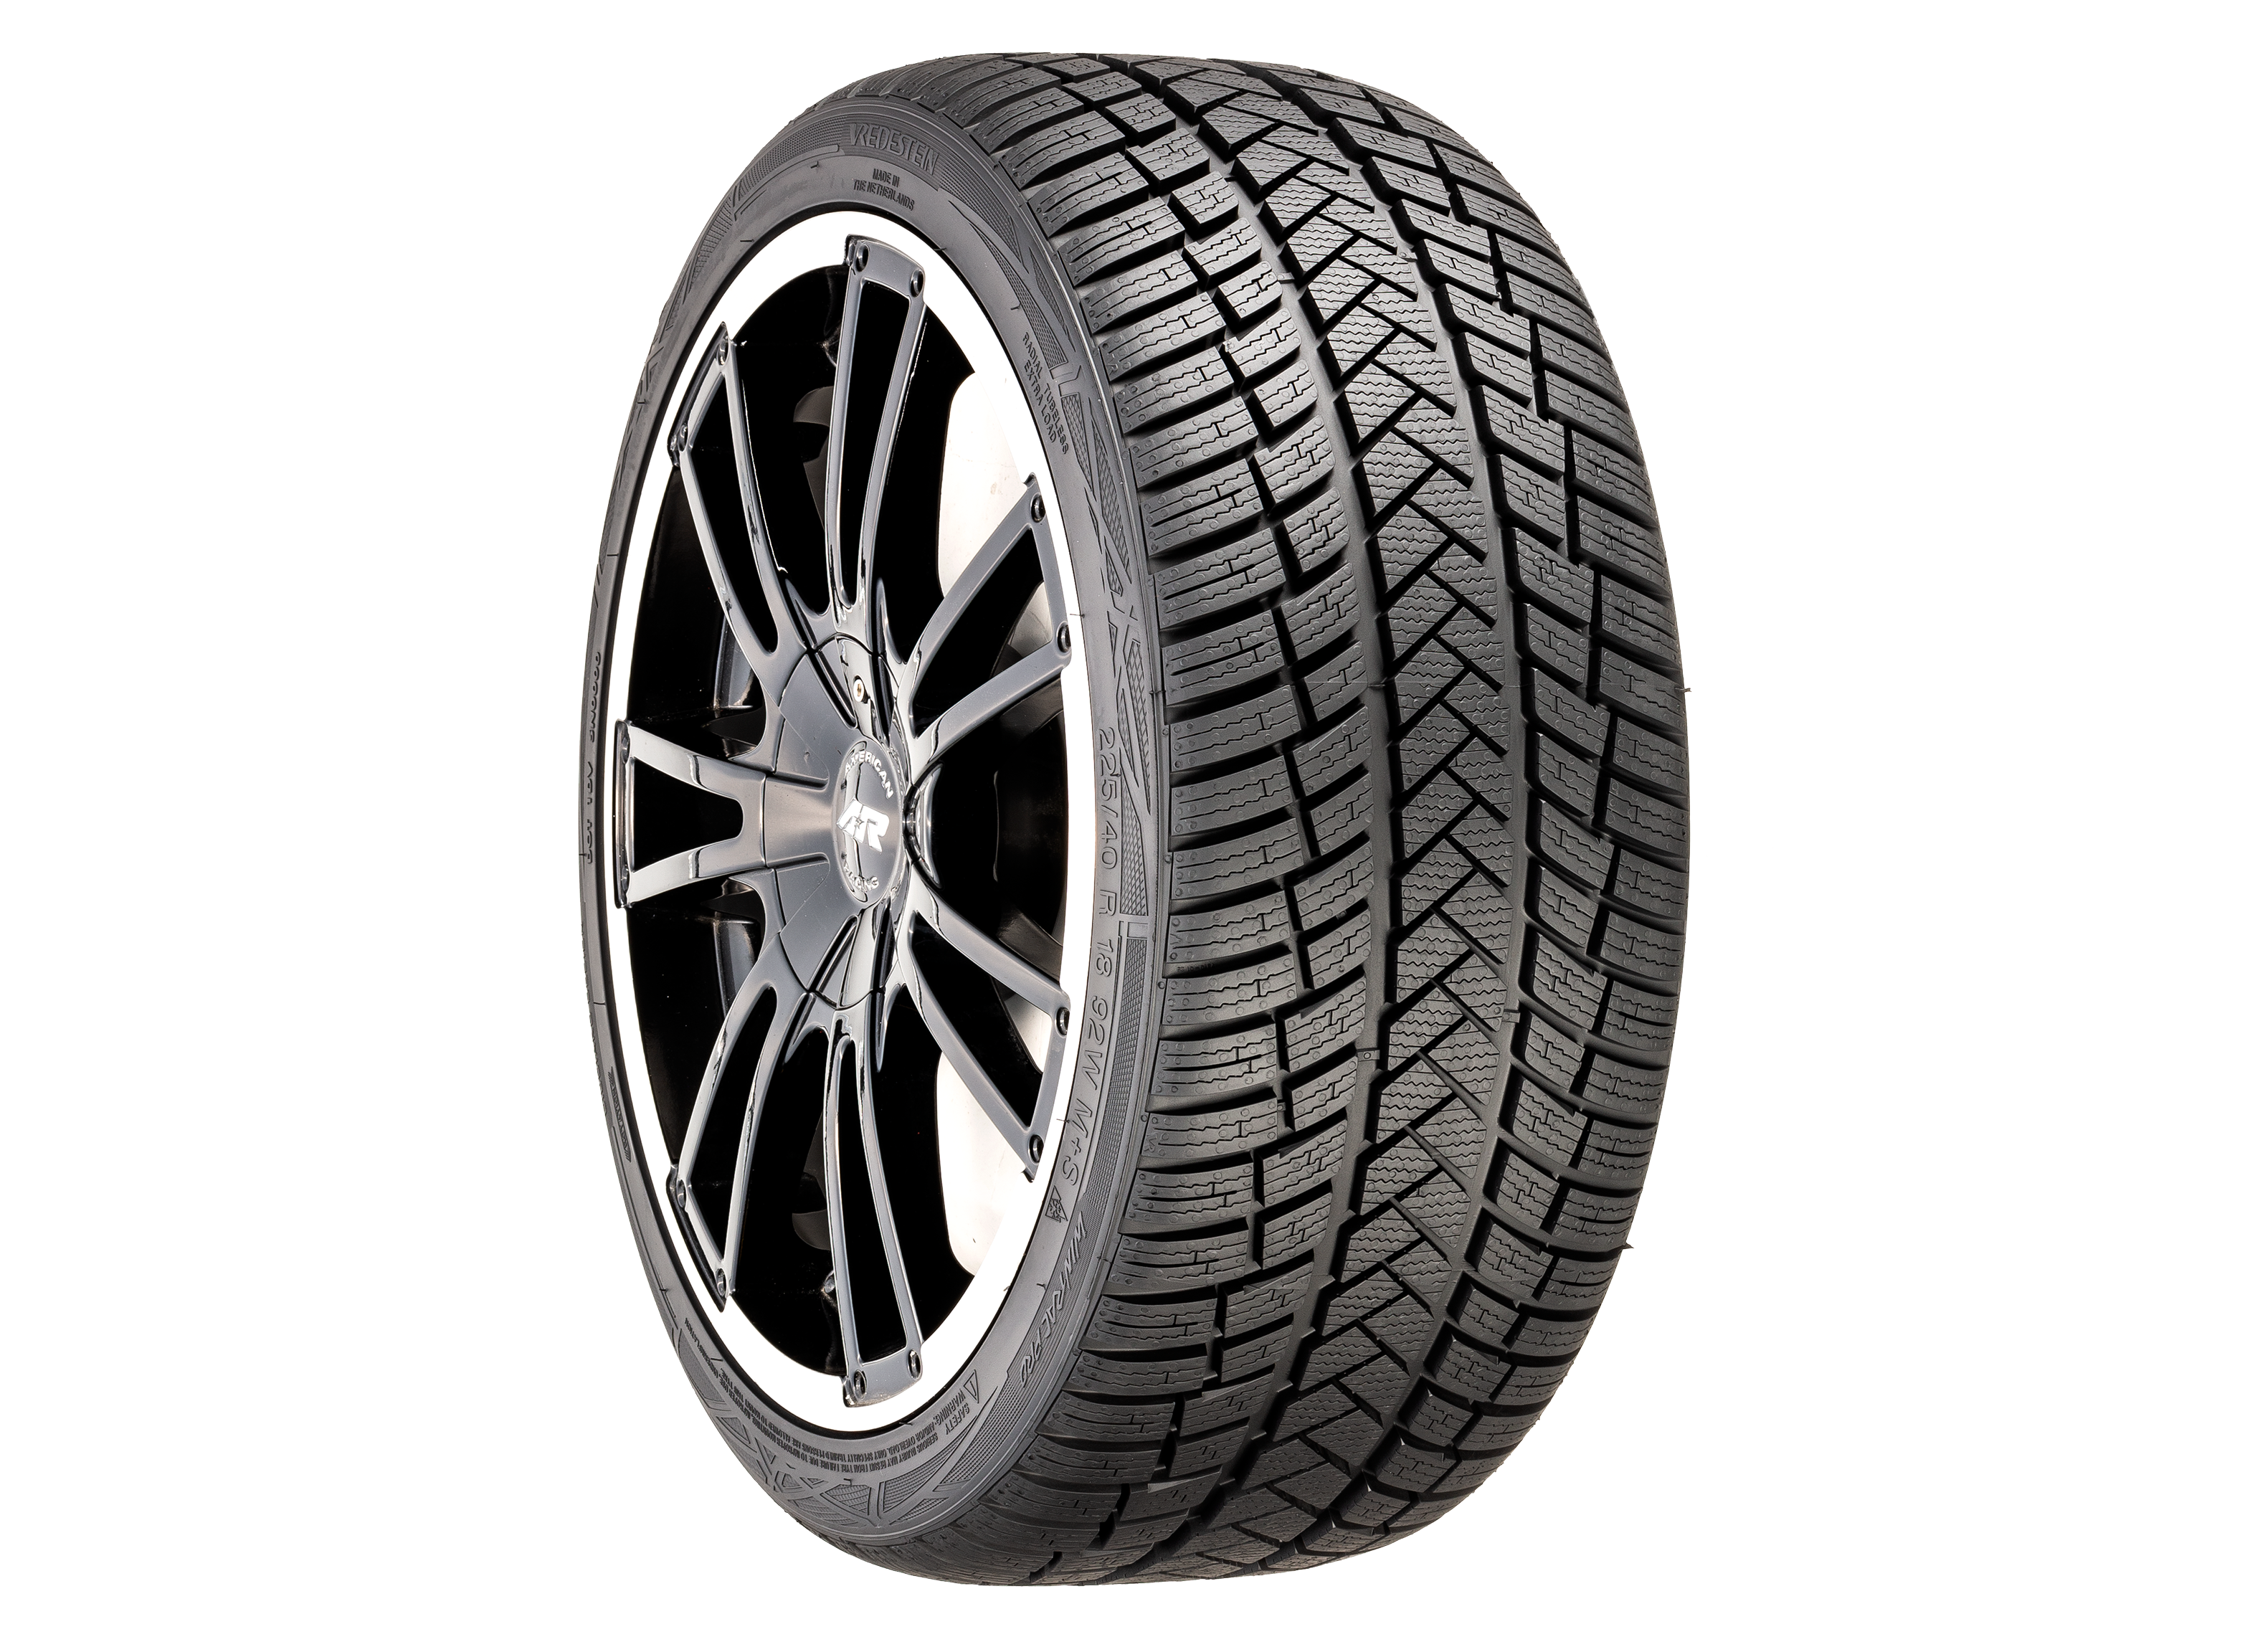 Vredestein Consumer - Pro Review Reports Wintrac Tire